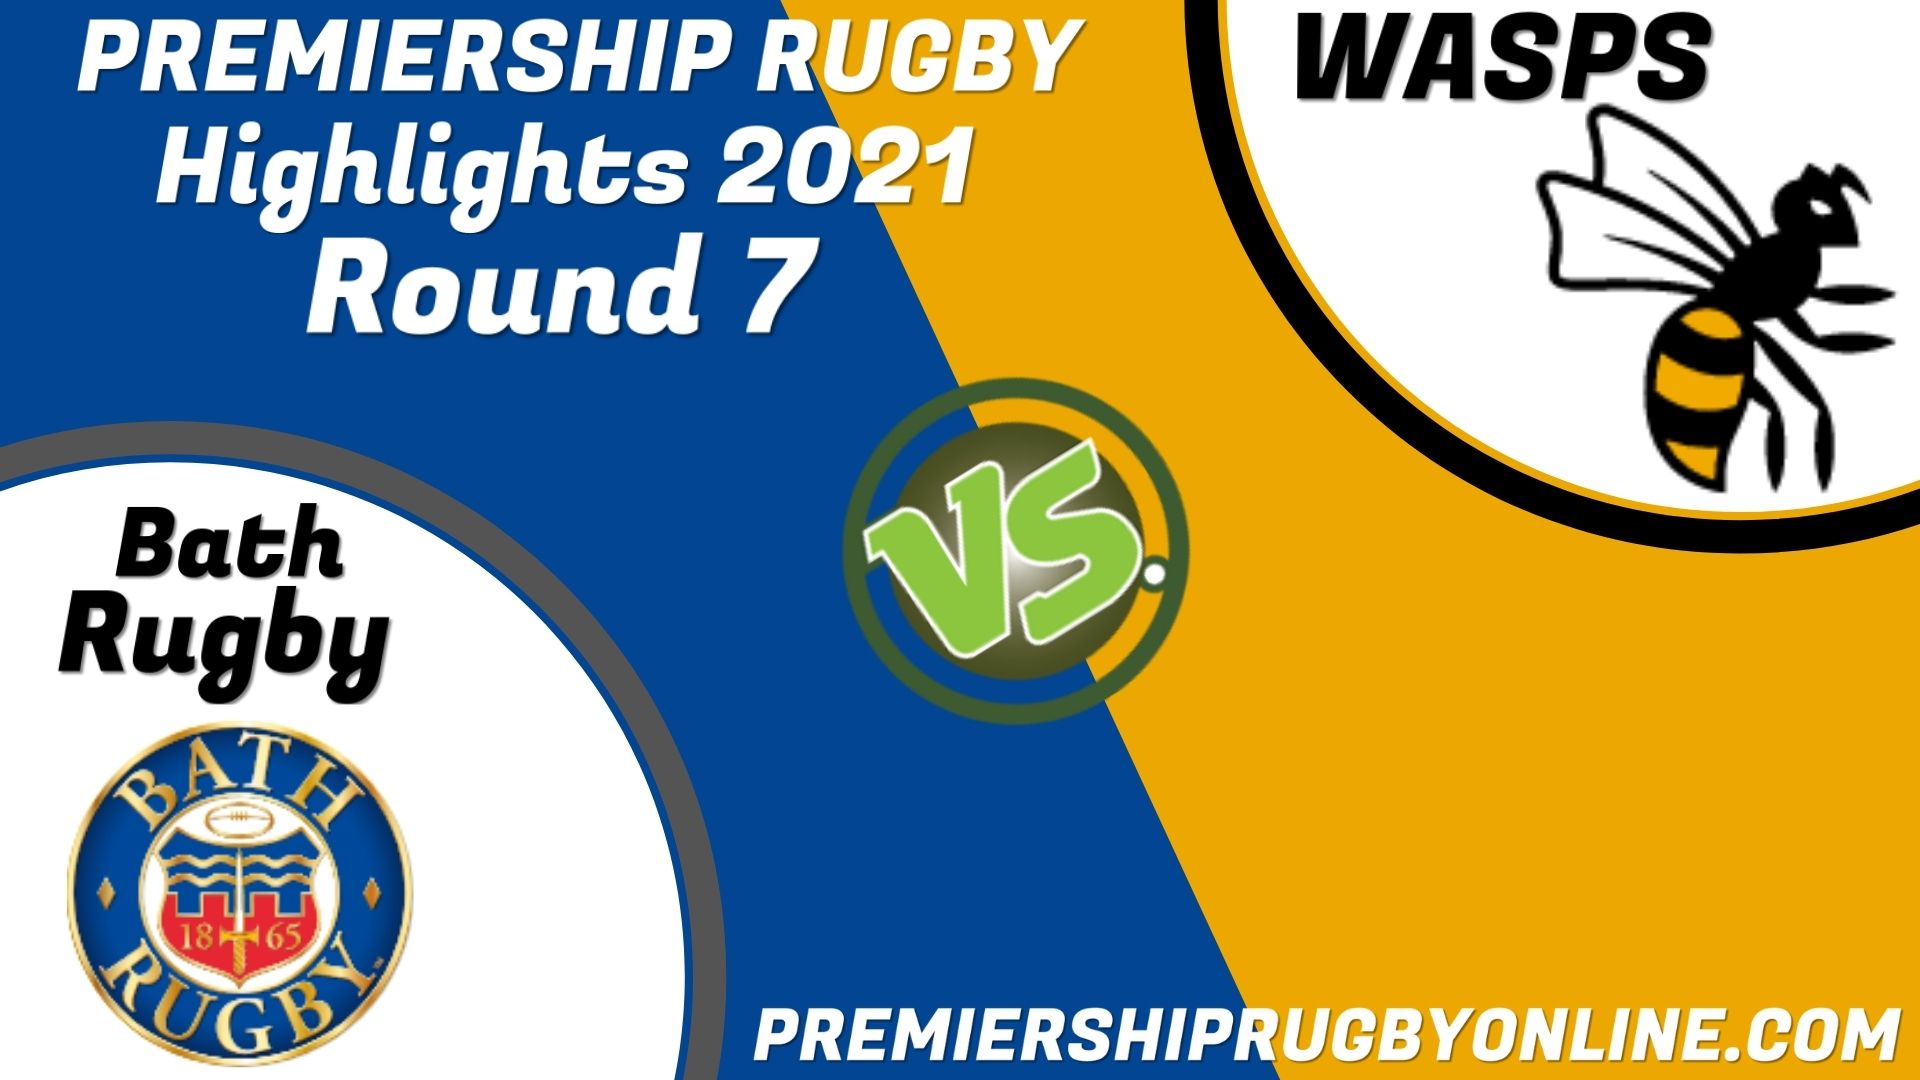 Bath Rugby Vs Wasps Highlights 2021 RD 7